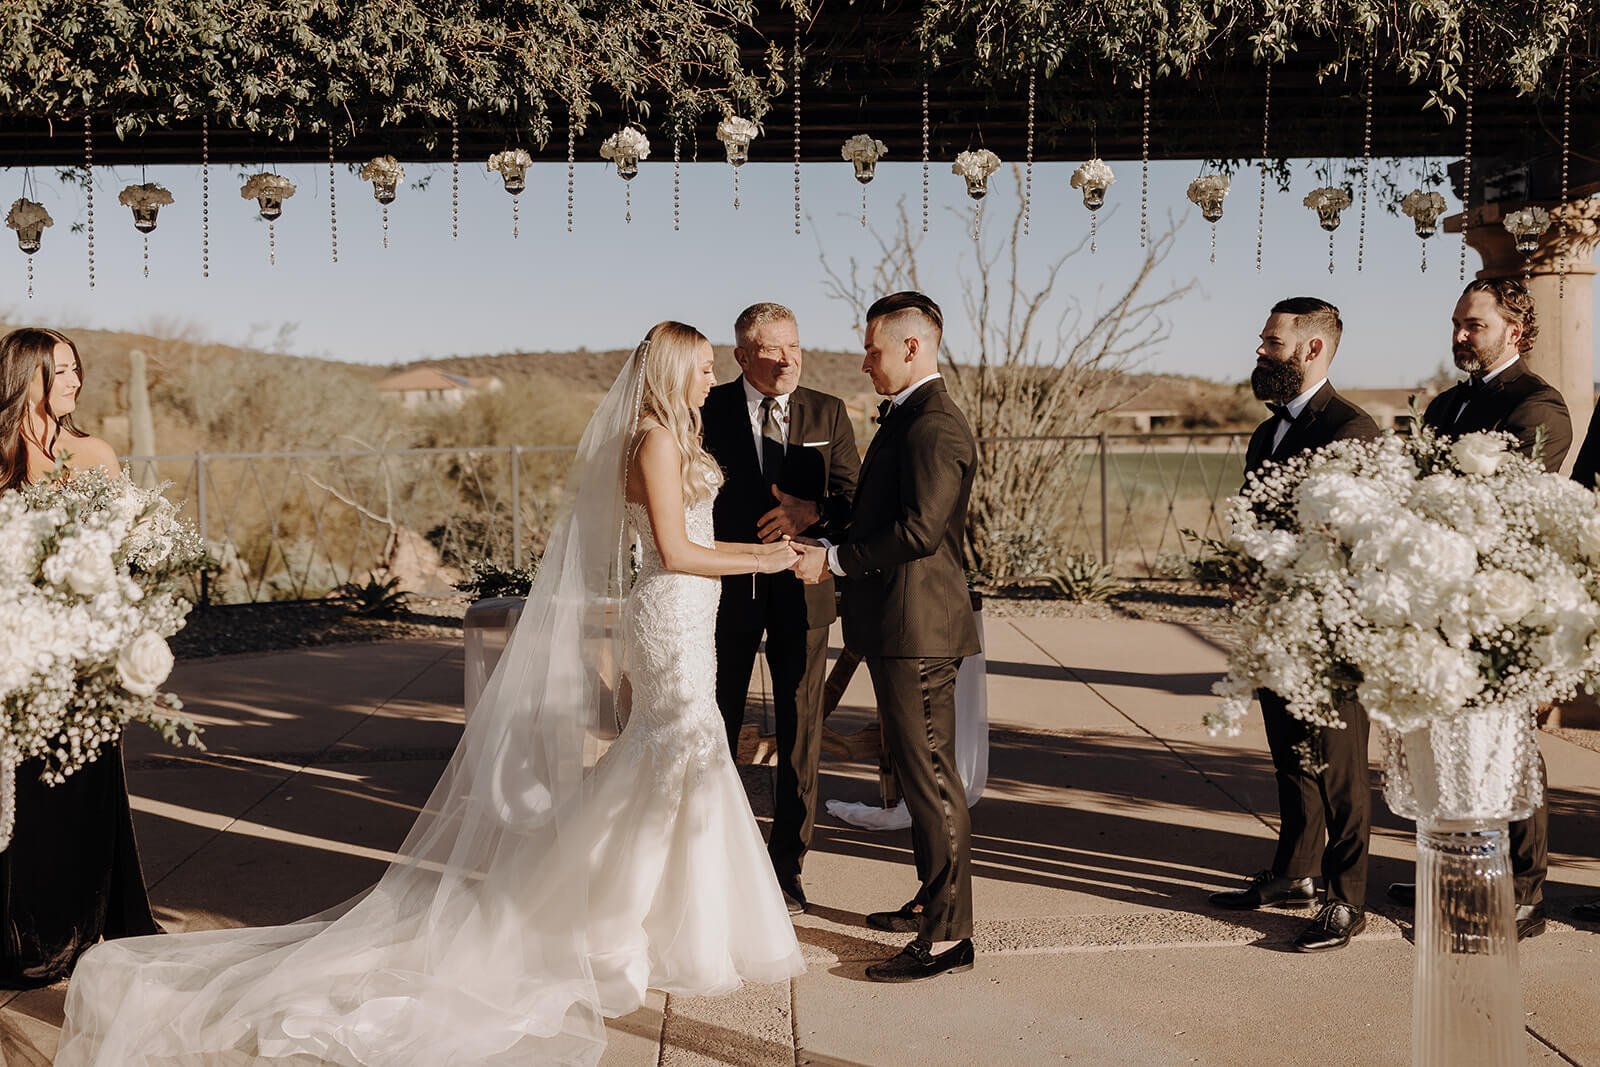 Bride and groom standing under a beautiful sunny arbor at an outdoor ceremony in Arizona